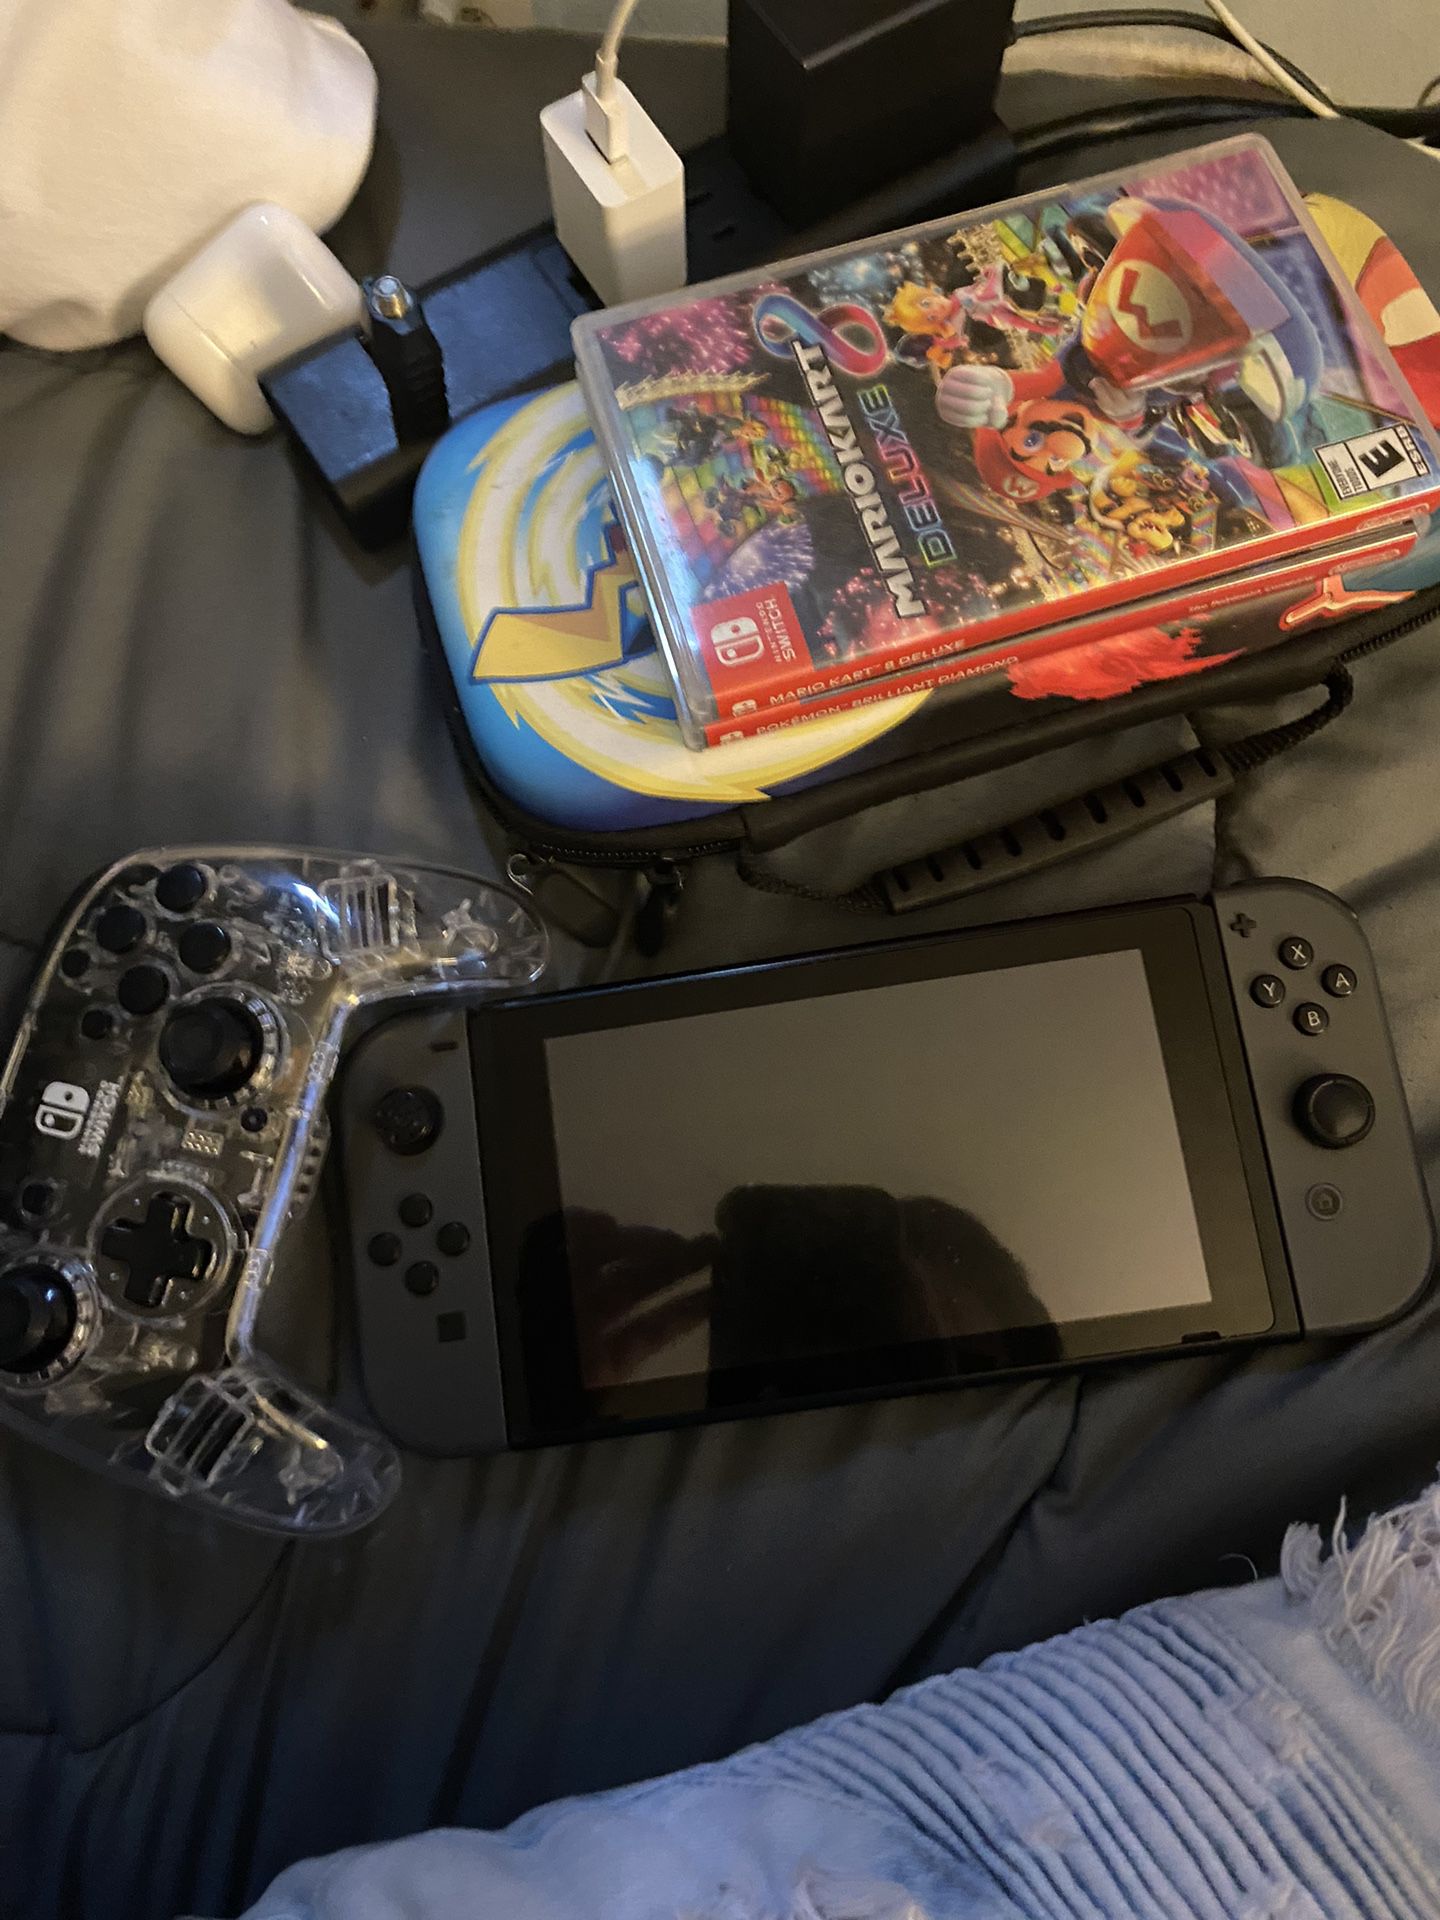 Nintendo Switch Looking For Trades Too